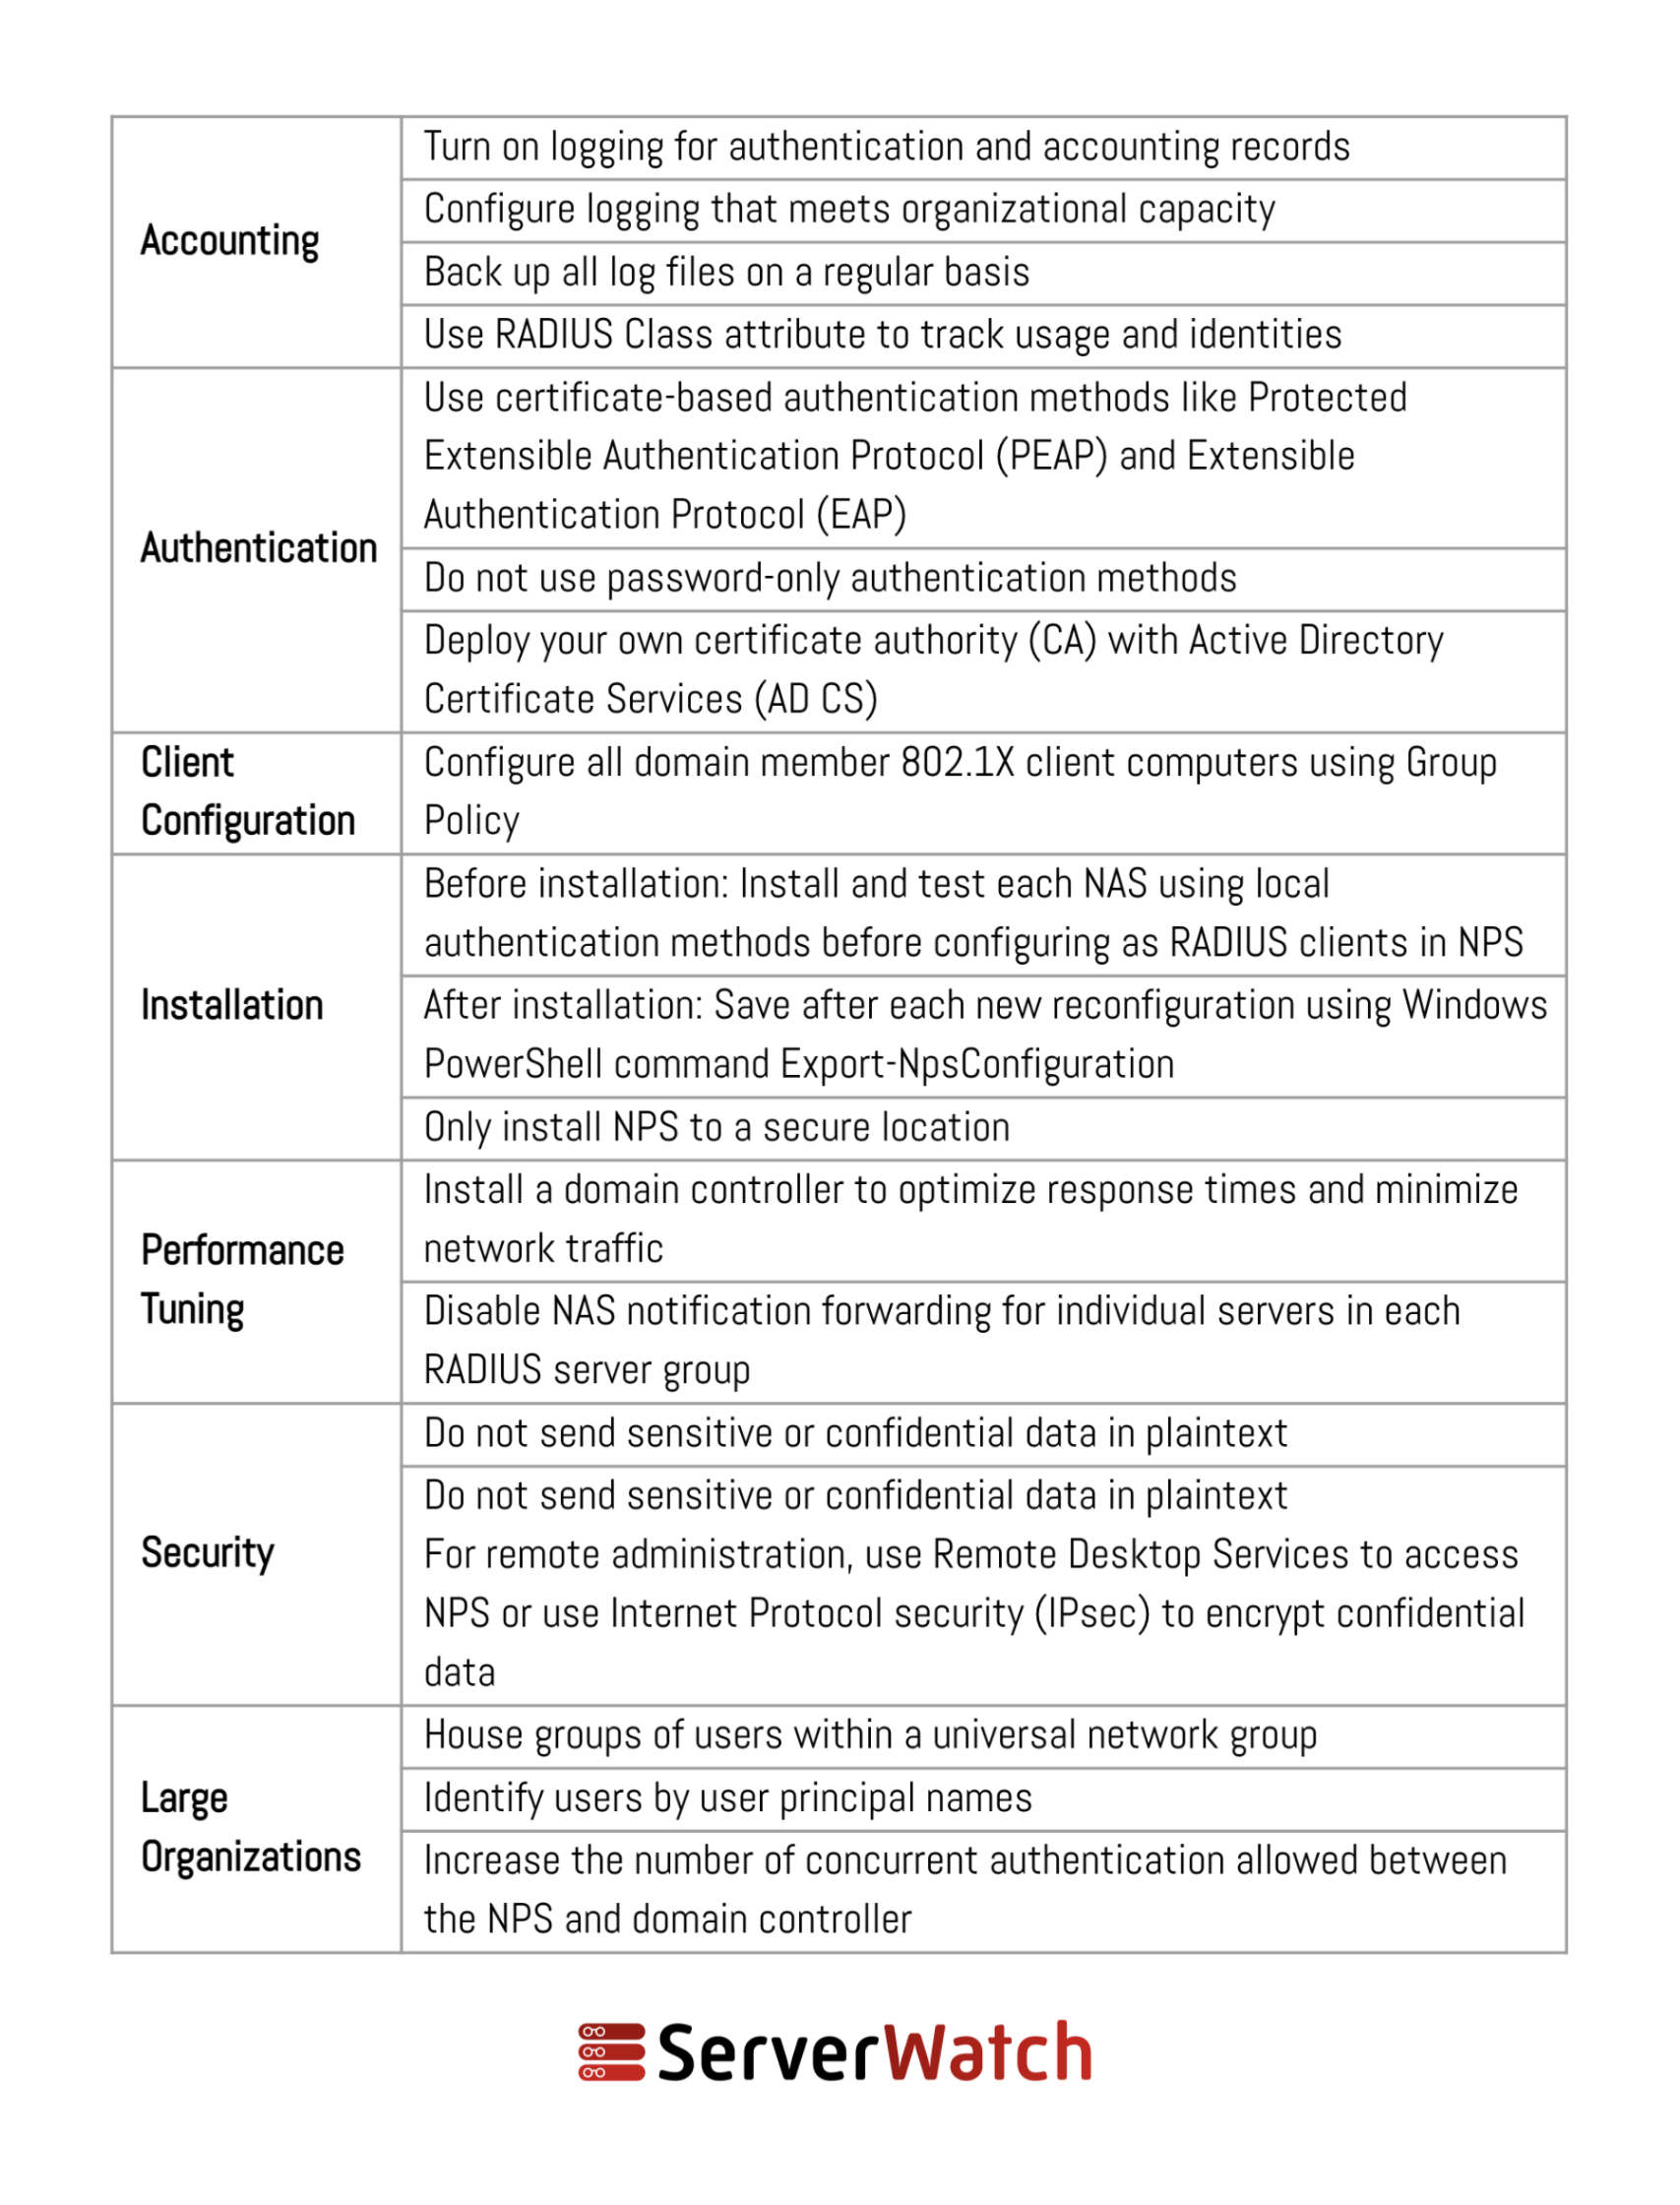 A graphic showing the best practices for NPS management like accounting, authentication, client configuration, installation, performance tuning, security, and how large organizations should deploy NPS systems. 